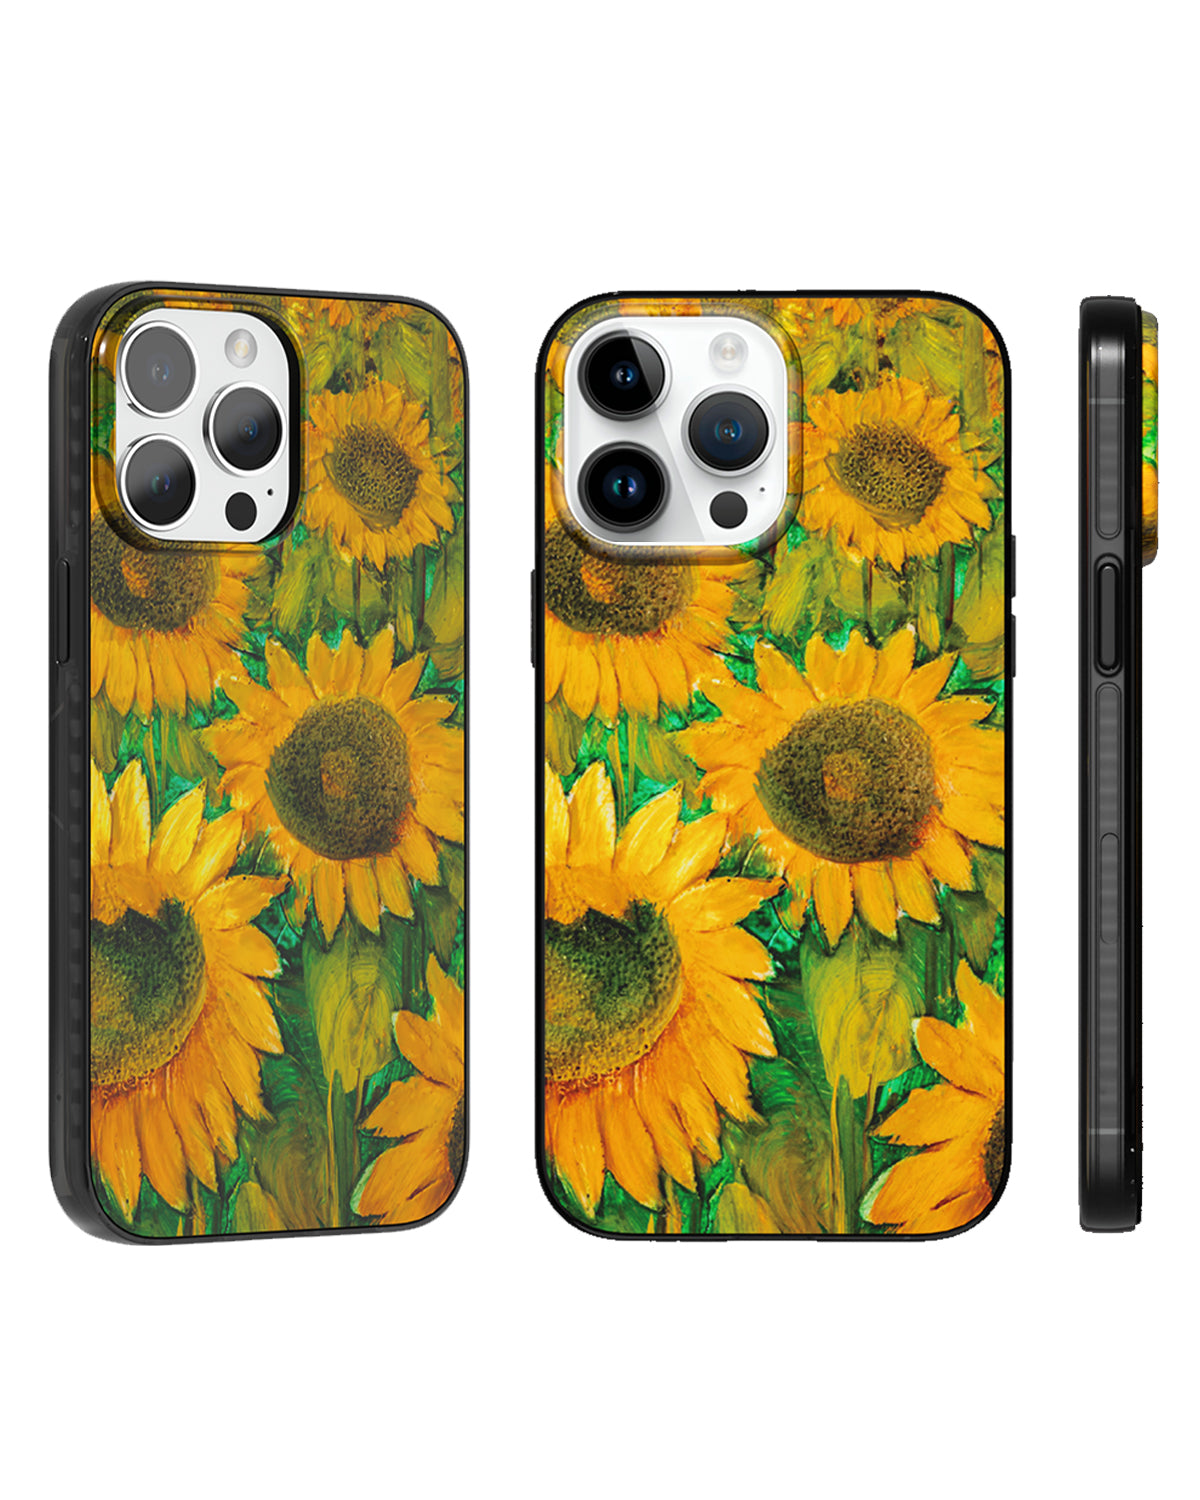 Sunflower Magnetic iPhone Case